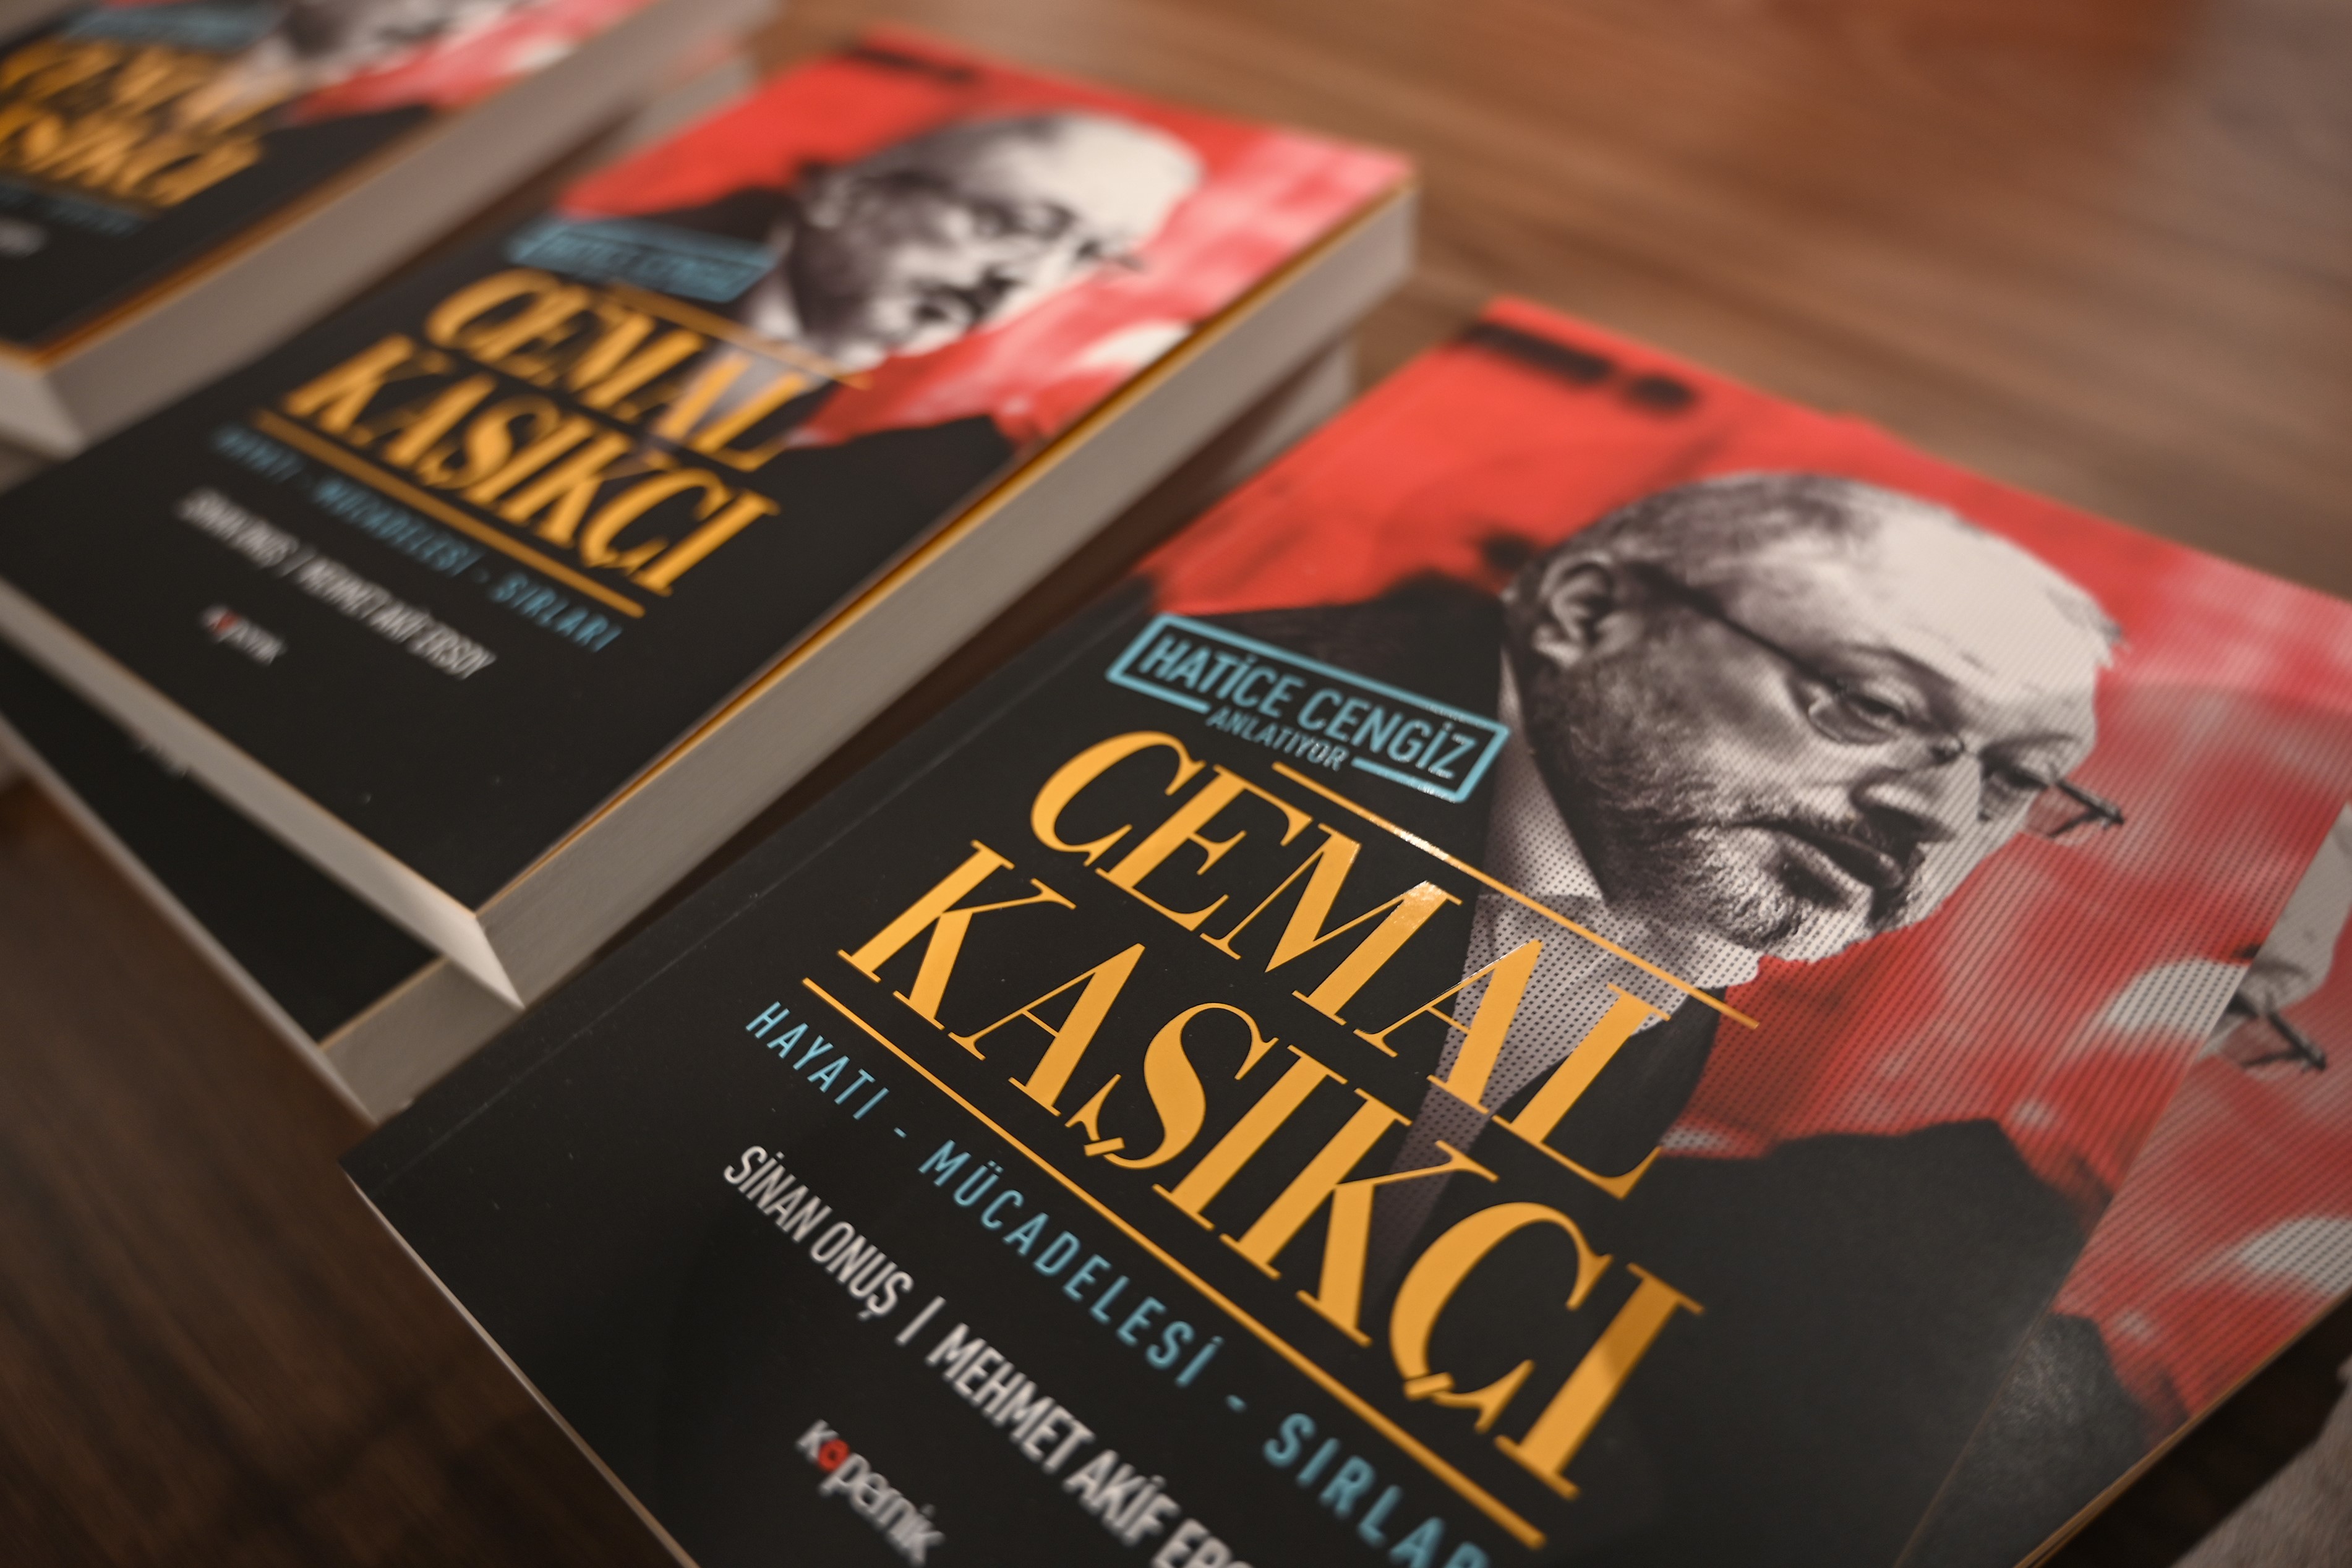 Books dedicated to the murdered the Saudi journalist Jamal Khashoggi, written by his partner Hatice Cengiz, are displayed during a presentation in Istanbul on 8 February (AFP)